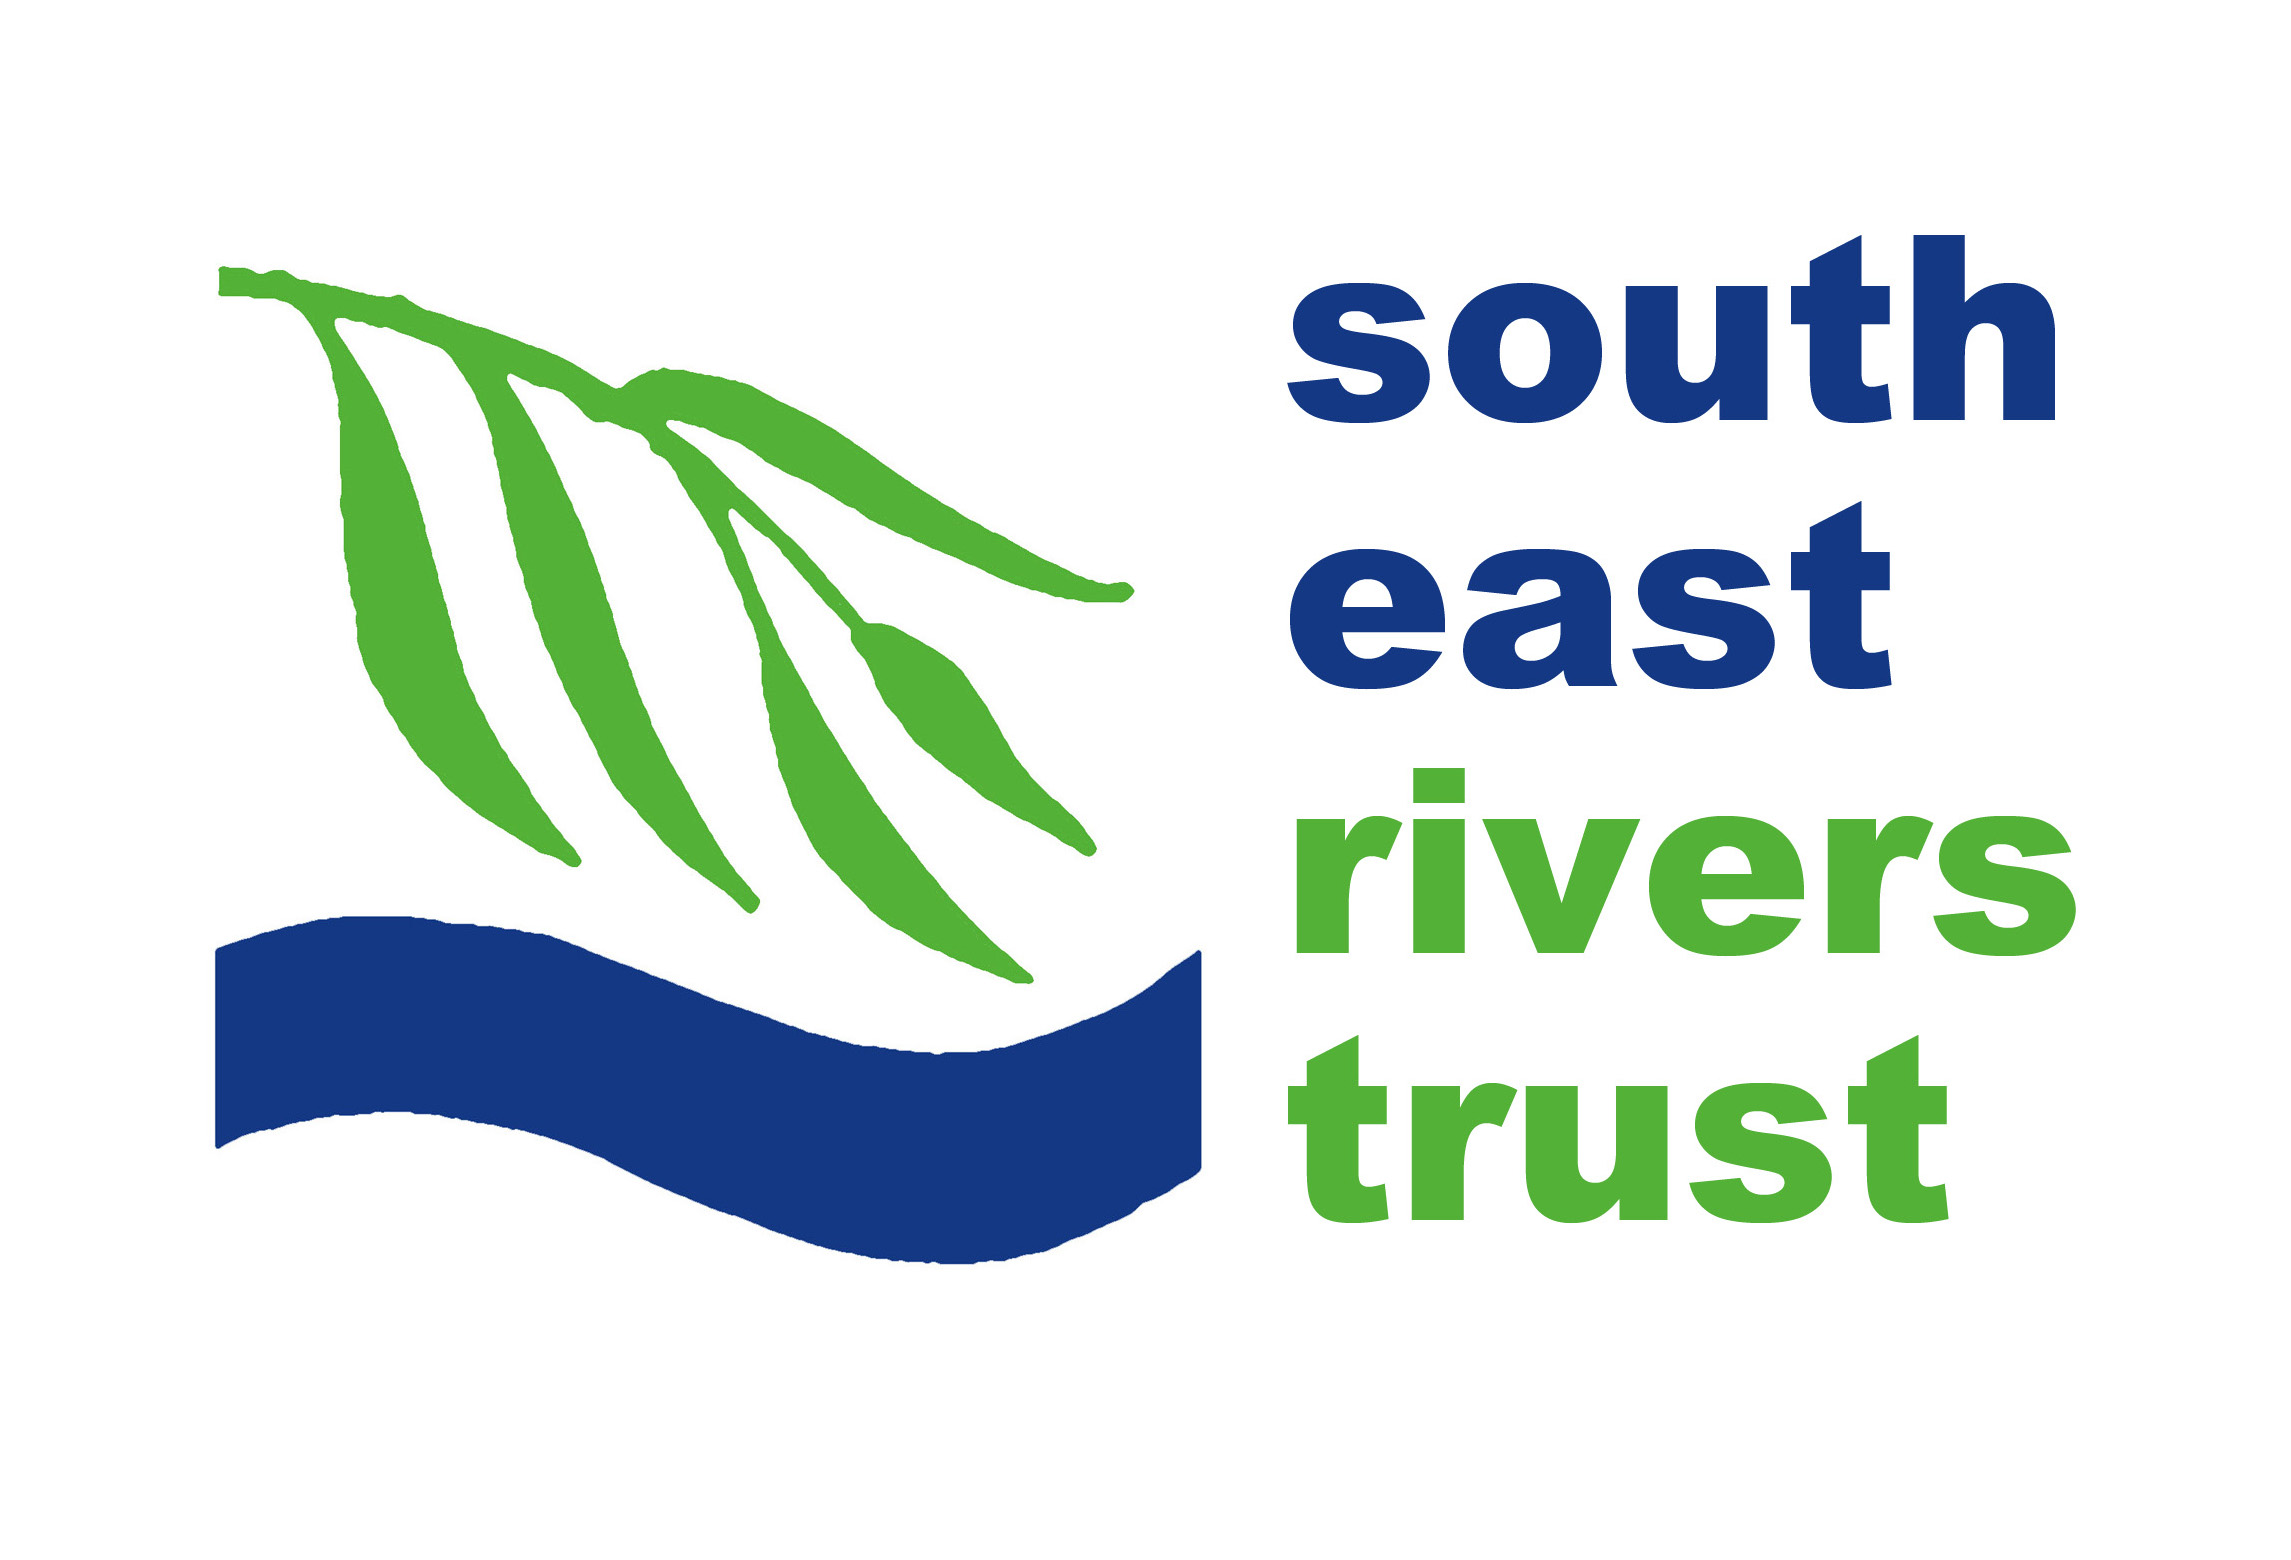 South East Rivers Trust logo with green leaves and blue river